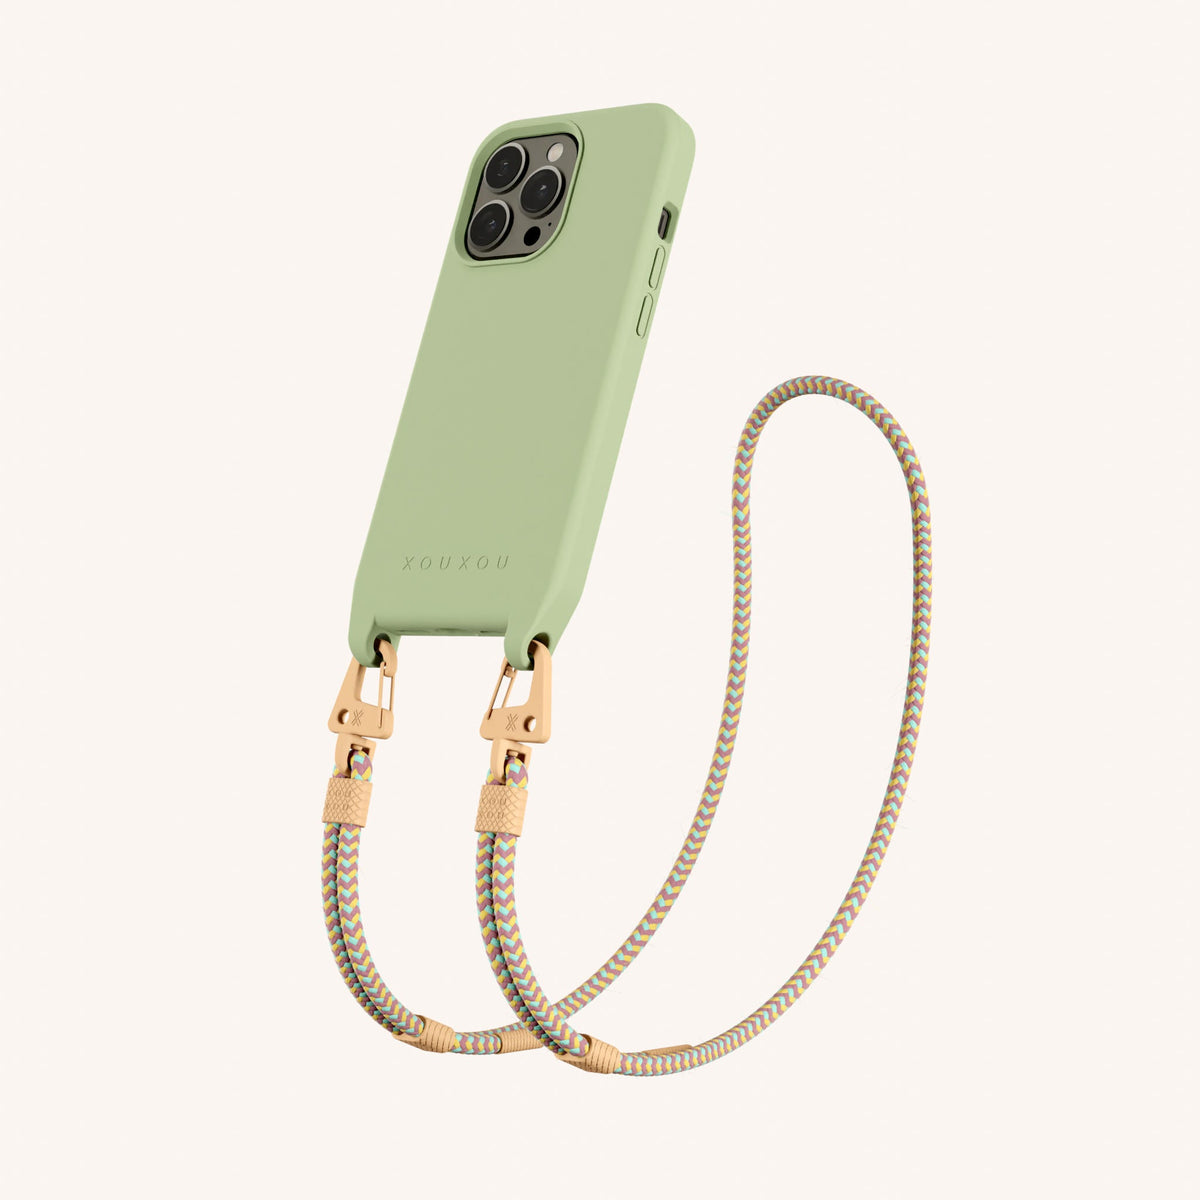 Phone Necklace with Carabiner Rope for iPhone 13 Pro with MagSafe in Light Olive + Palm Springs Perspective View | XOUXOU #phone model_iphone 13 pro